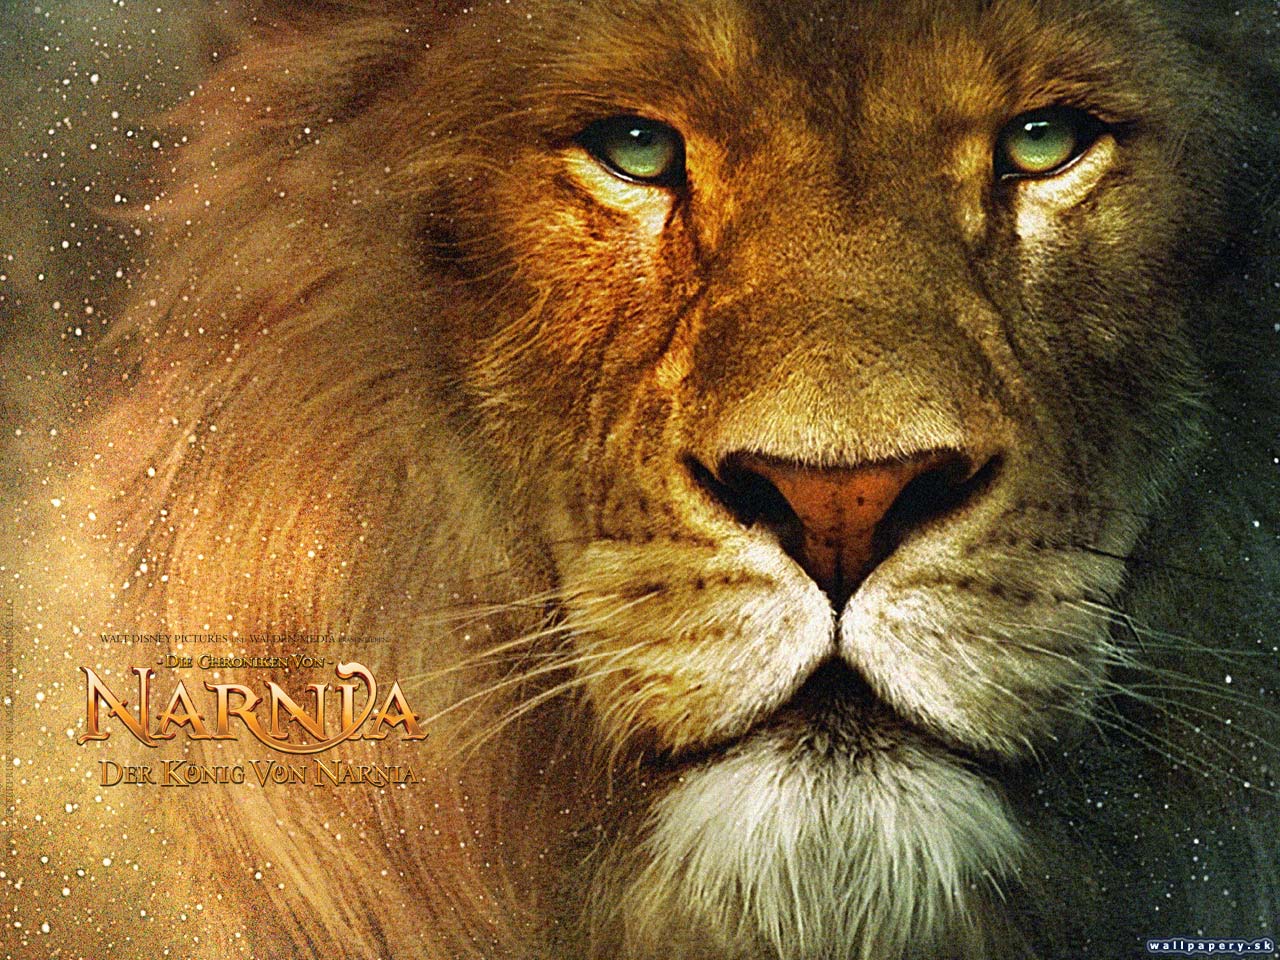 The Chronicles of Narnia: The Lion, The Witch and the Wardrobe - wallpaper 9